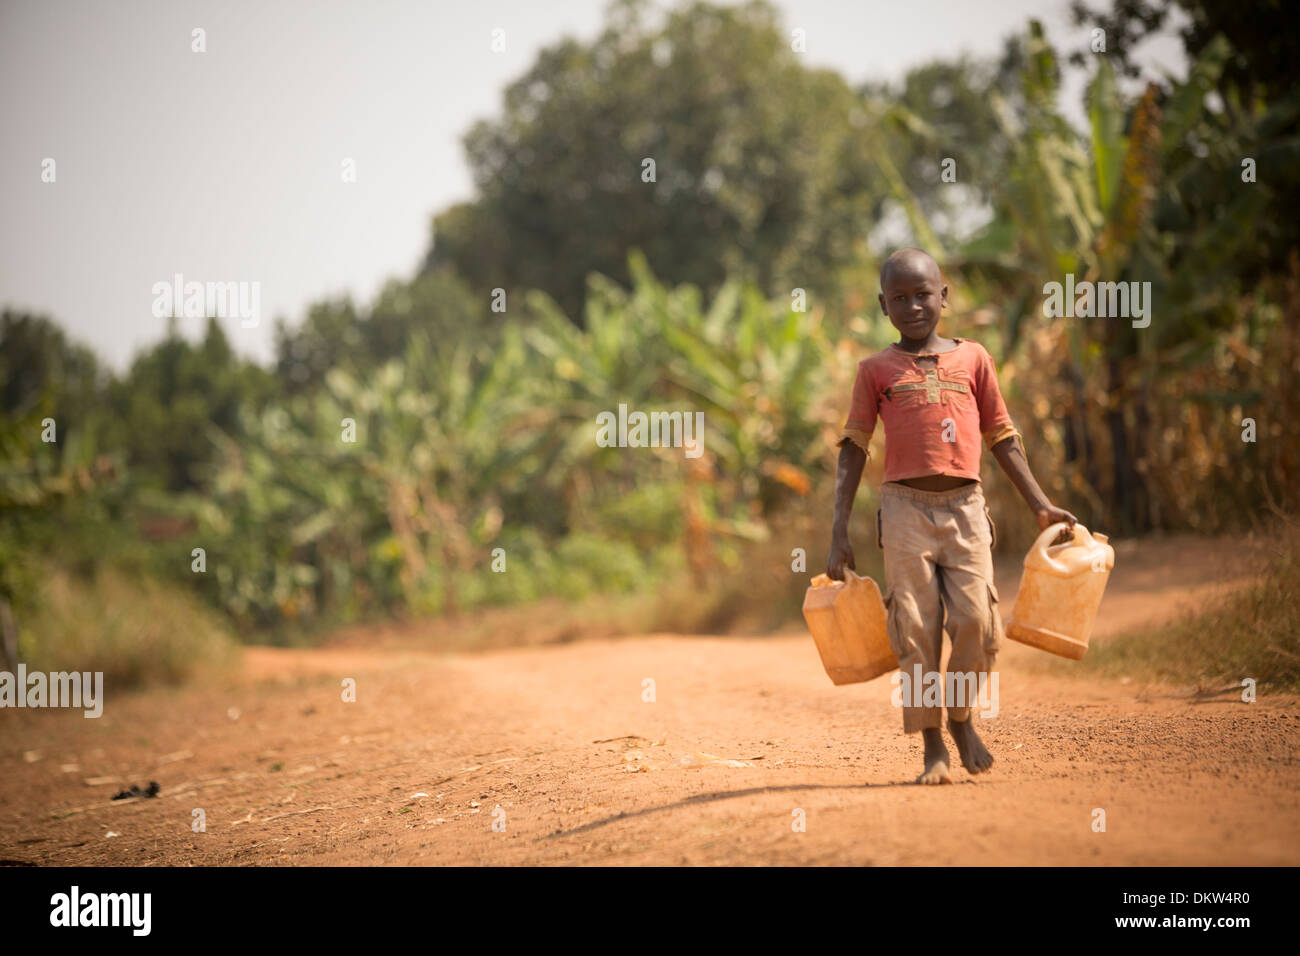 A child carries water cans in Gombe, Uganda, East Africa. Stock Photo